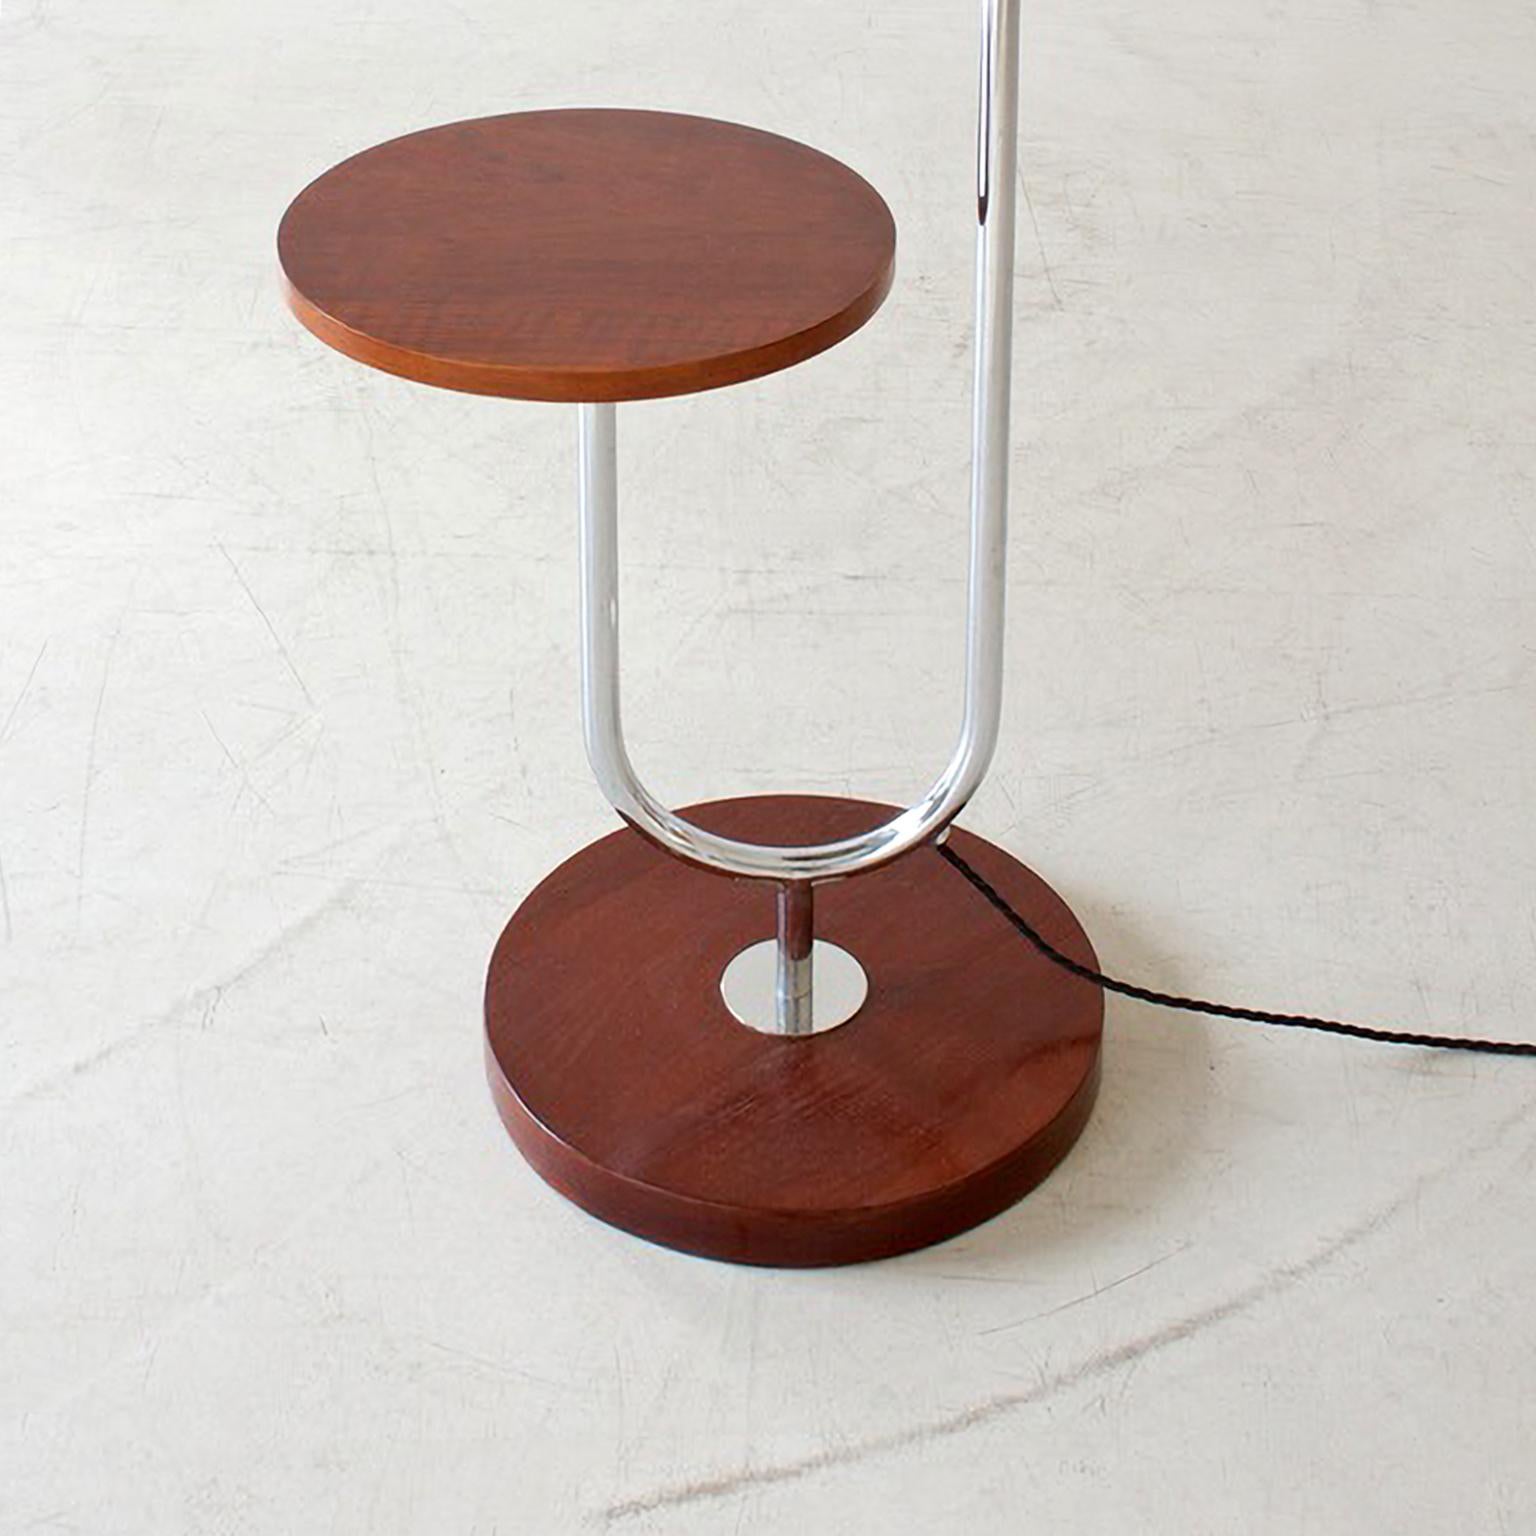 Modernist Floor Lamp With Integrated Table, Nickel Plated Metal, Stained Wood In Good Condition For Sale In Berlin, DE